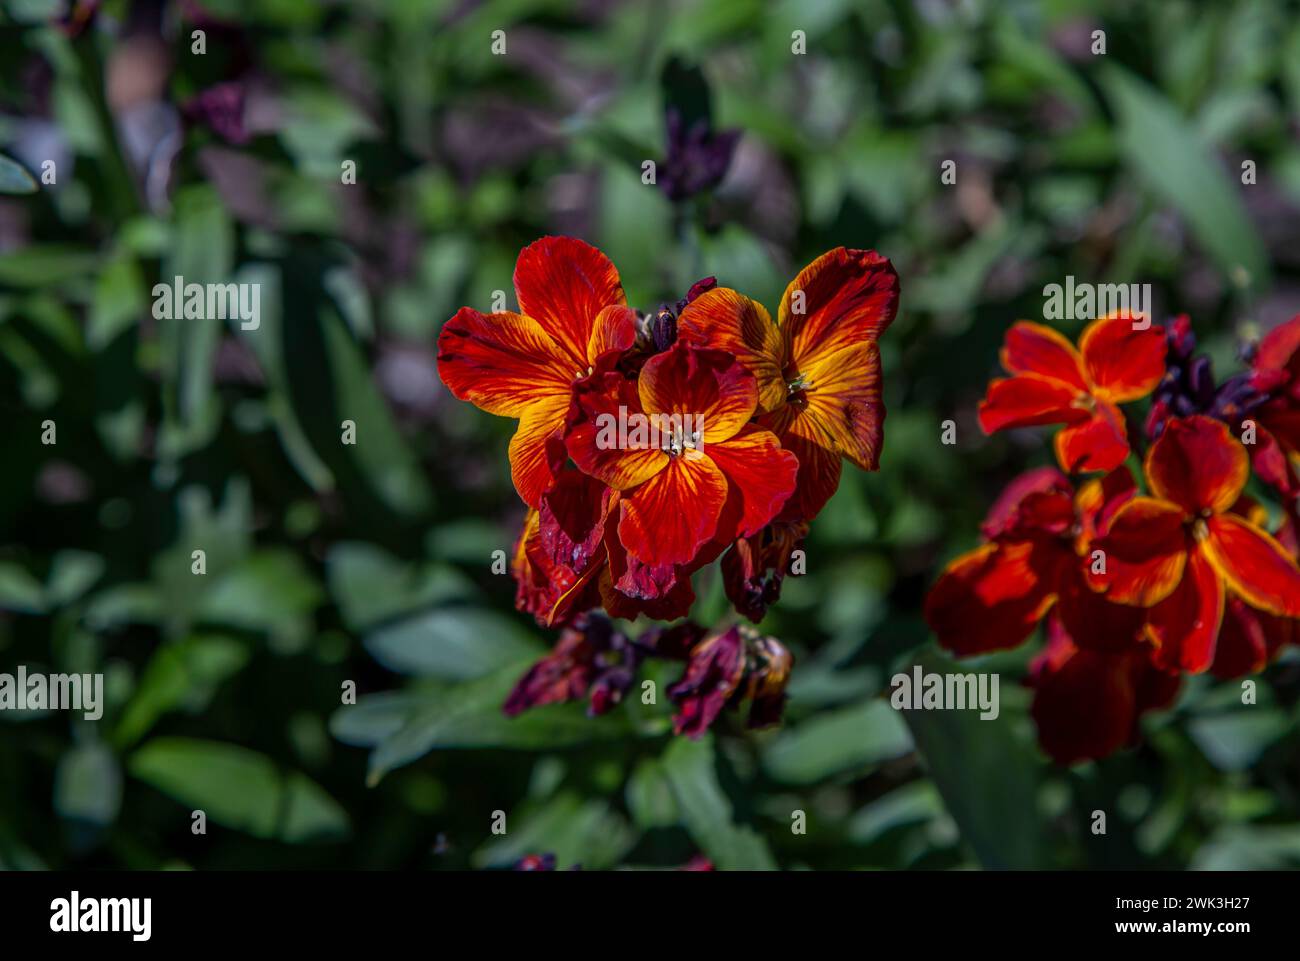 Blooming Erysimum cheiri,  Cheiranthus cheiri, the wallflower with bright red, orange and yellow petals growing in the garden Stock Photo